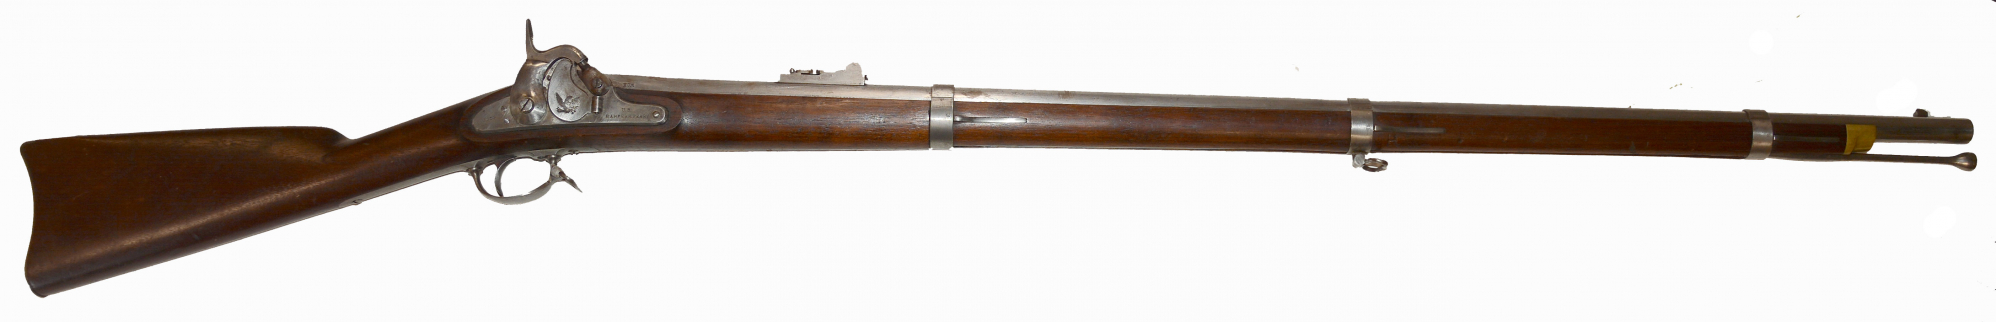 HARPERS FERRY M1855 PERCUSSION RIFLE-MUSKET, DATED 1858